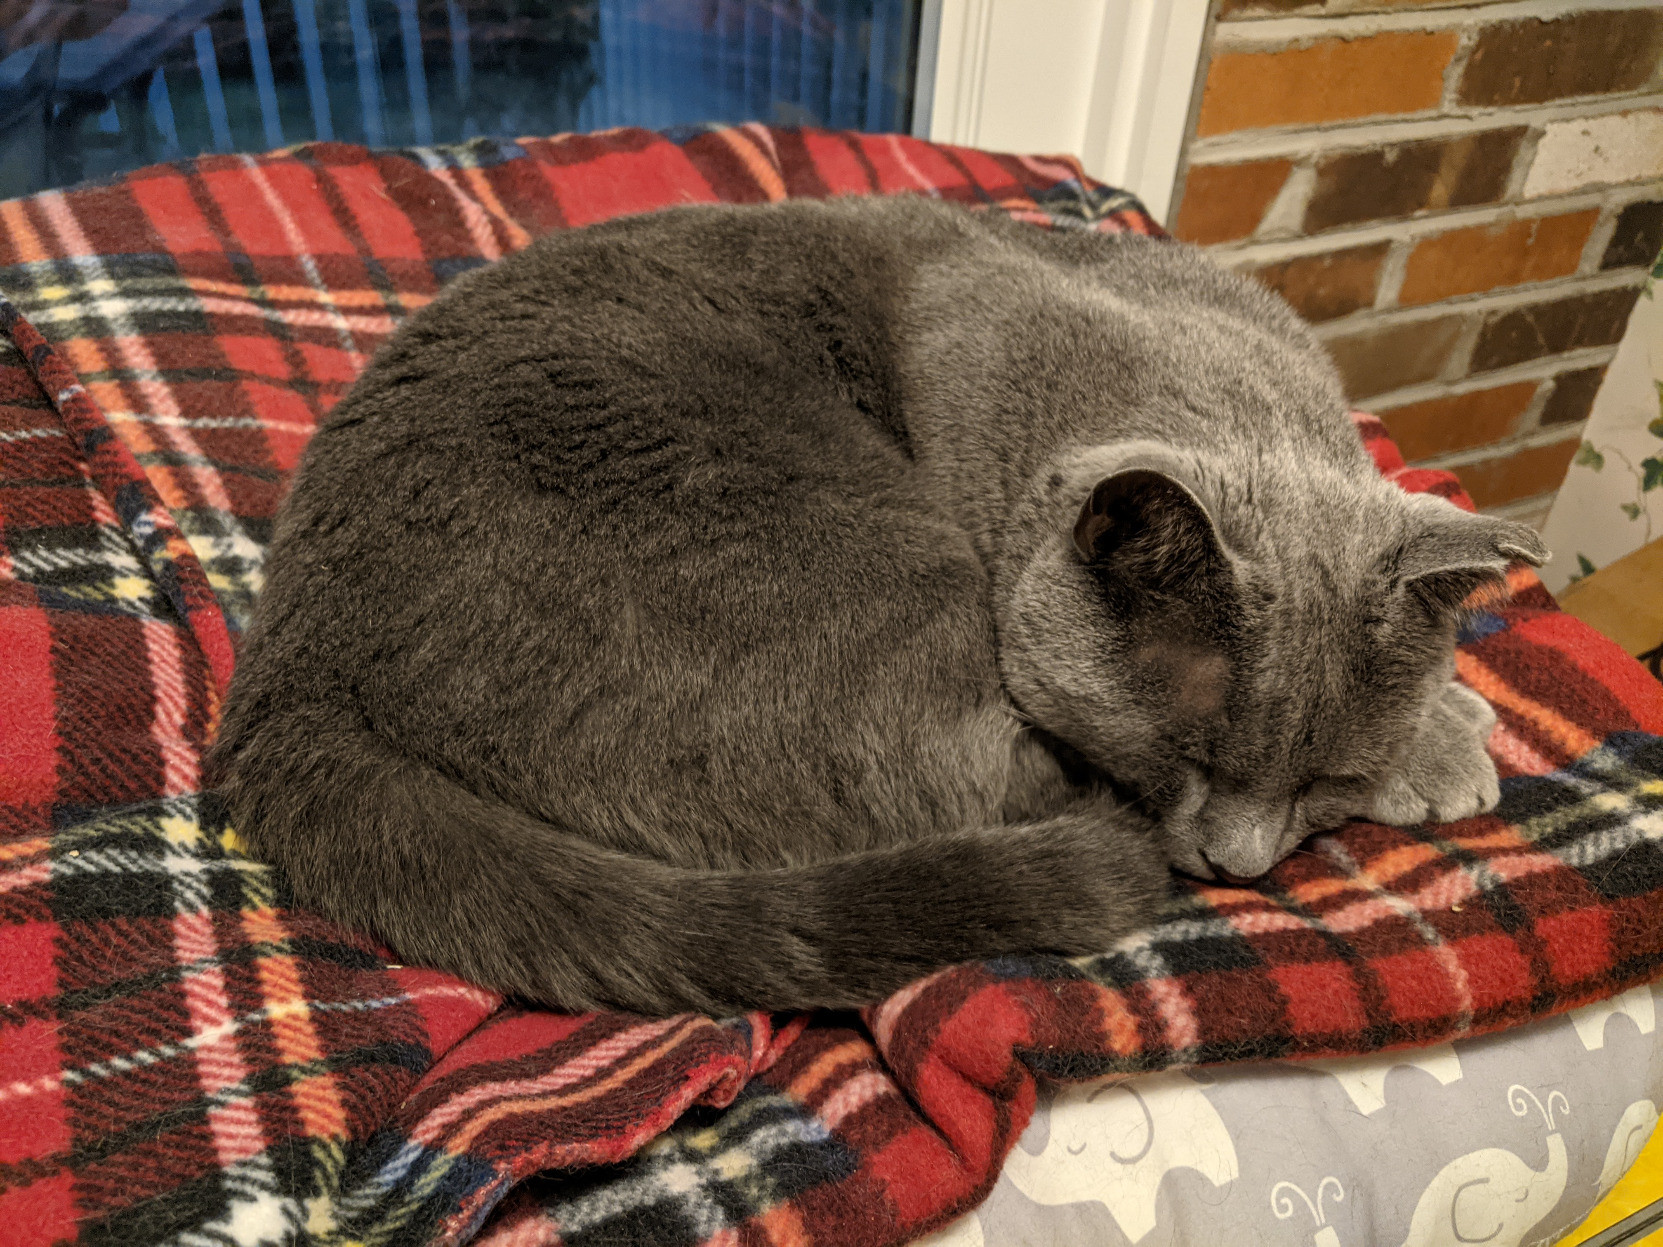 A gray cat curled up on a red flannel blanket folded on a pillow, with part of a window overlooking a back yard deck in the background.